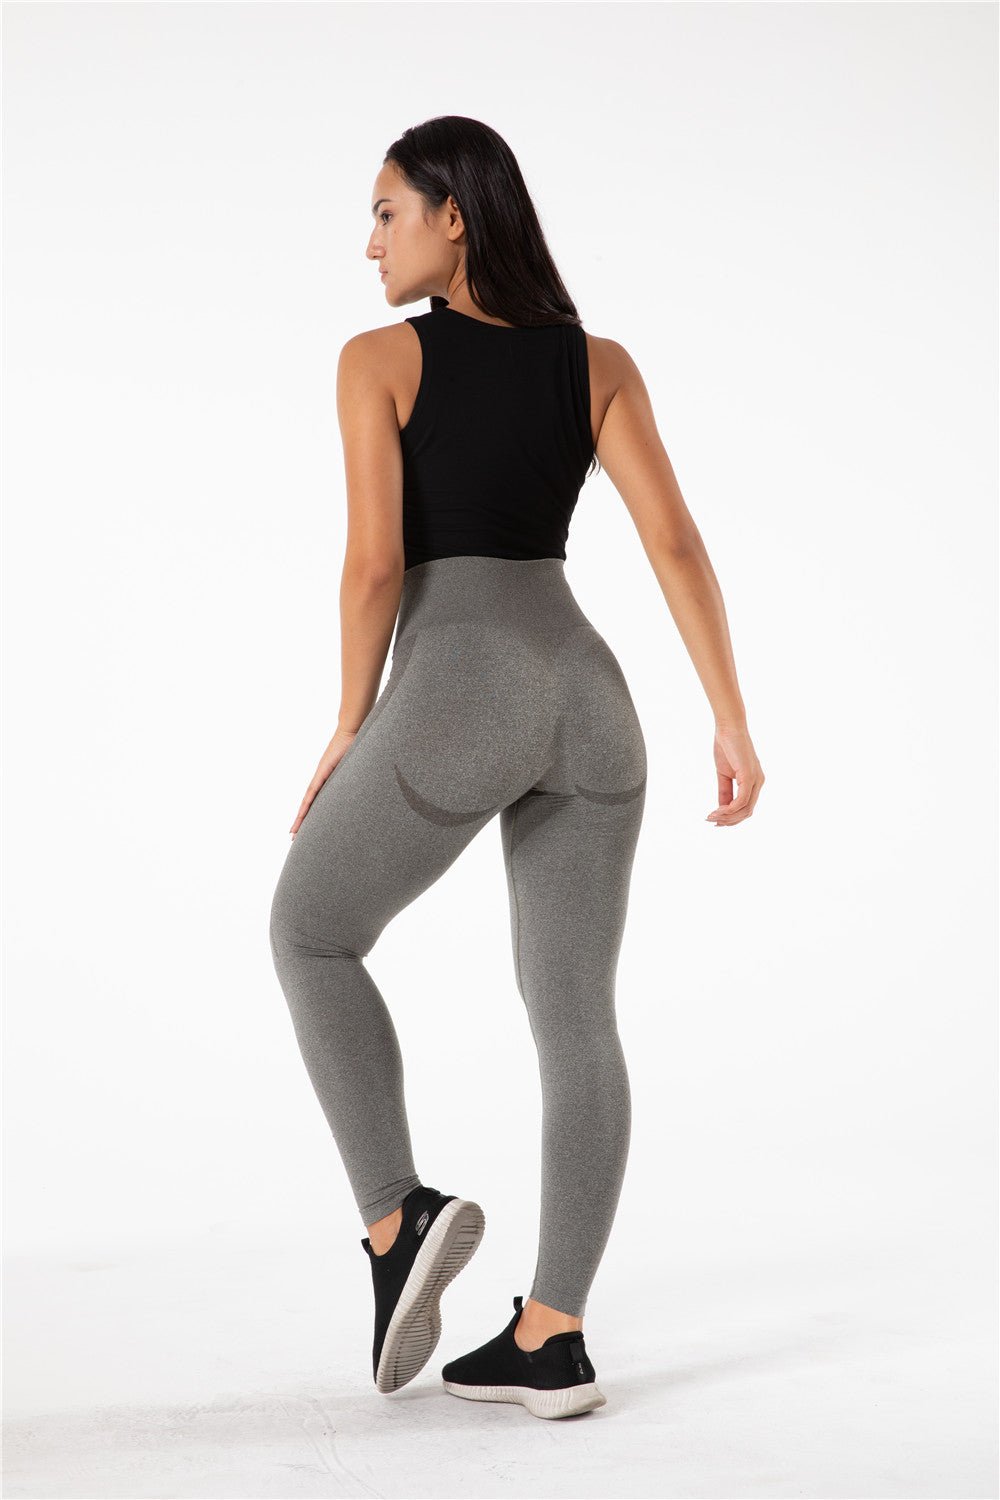 Women's Gym Leggings | Gym Clothes For Women | Flamin' Fitness